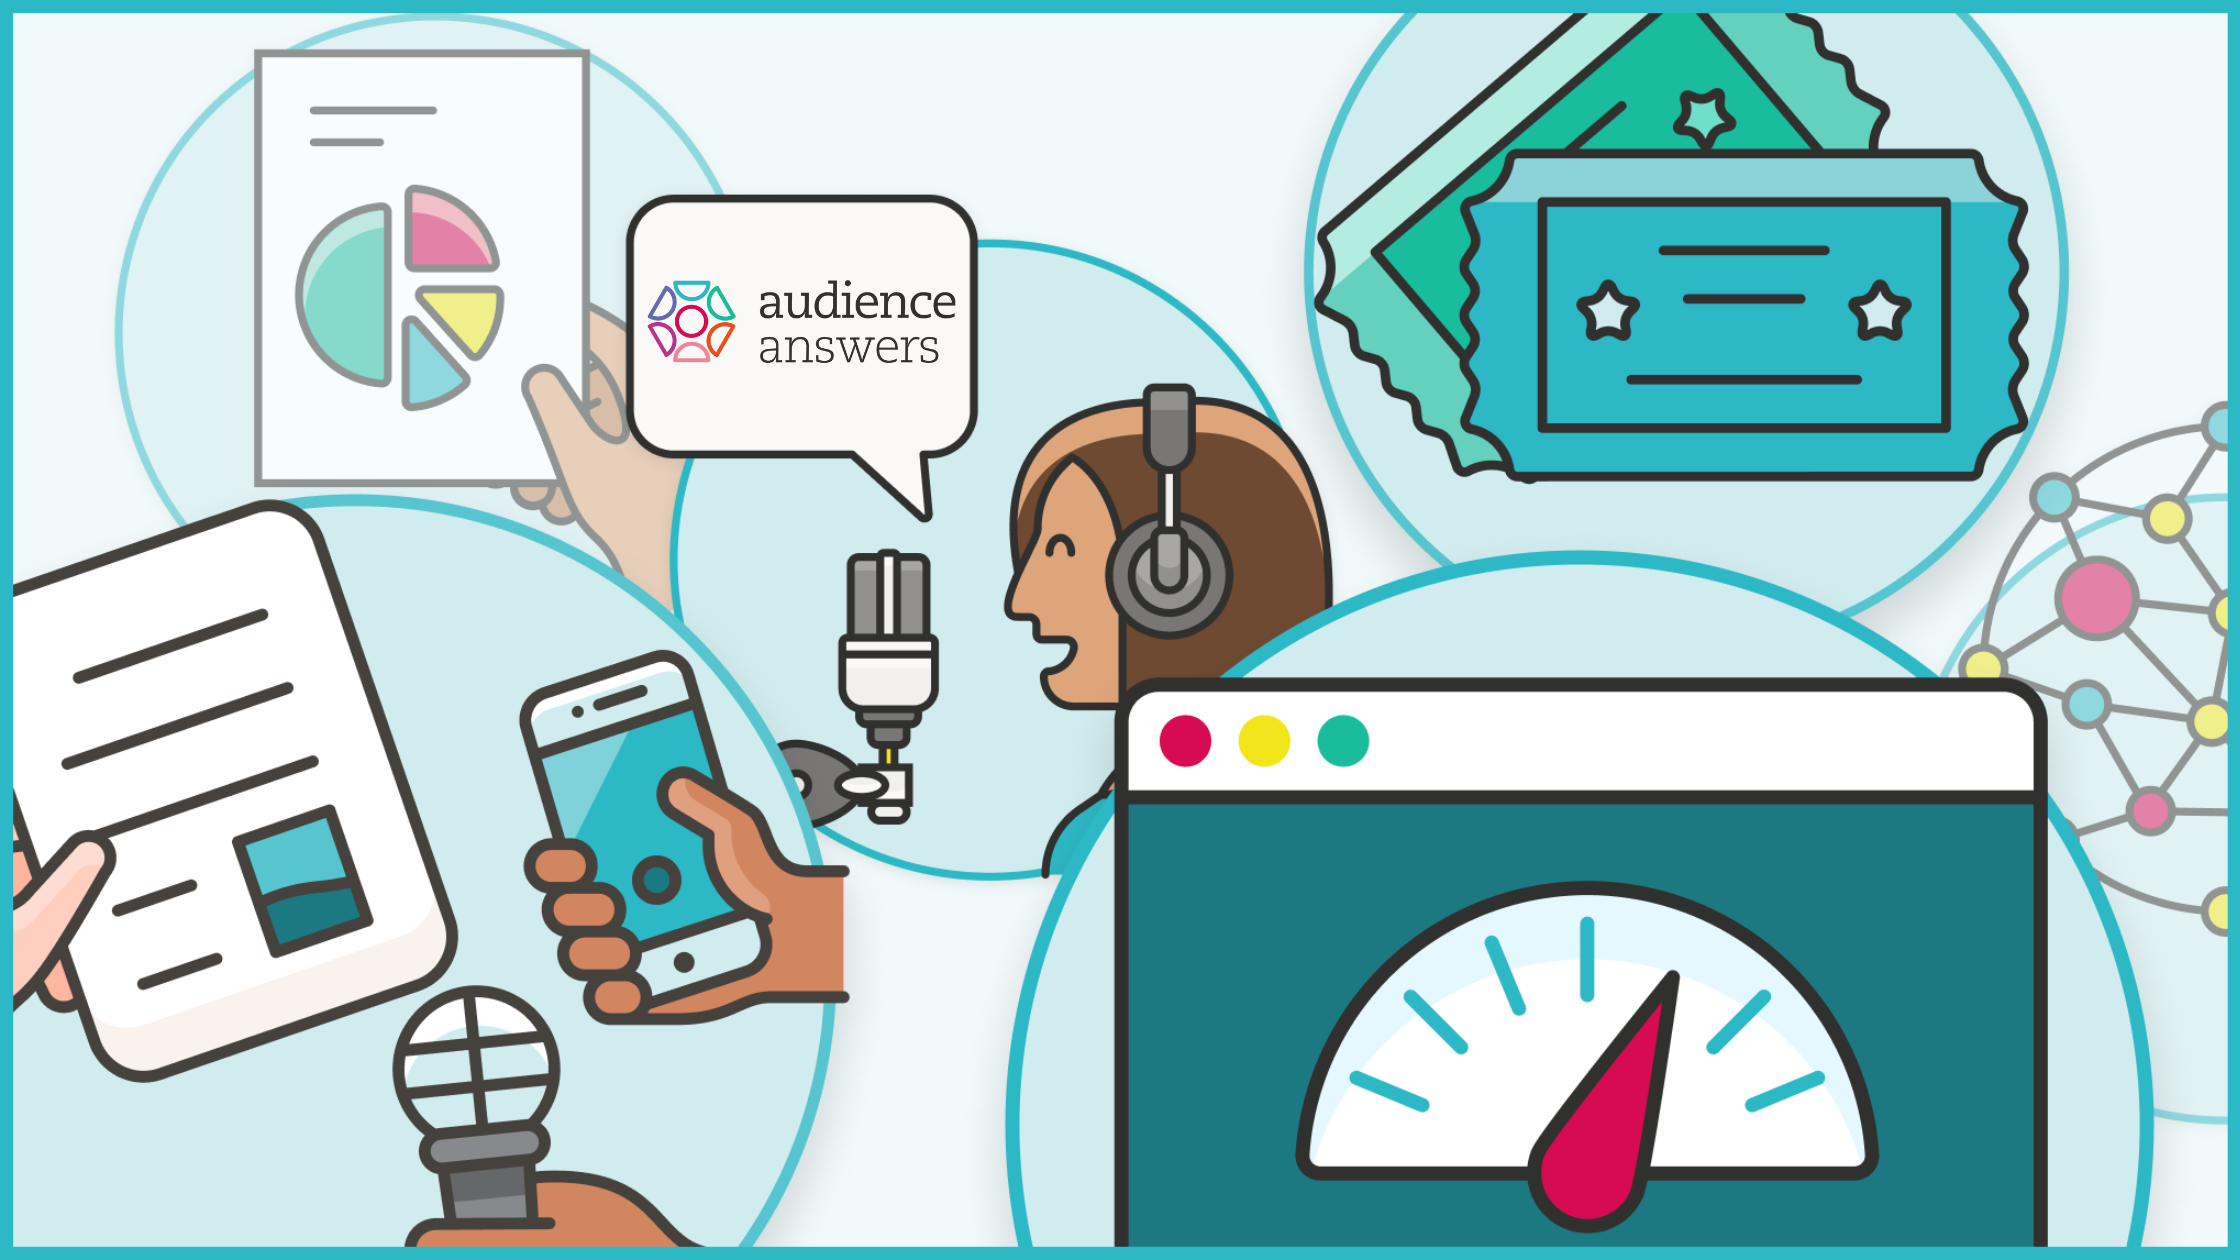 Blog header image has icons of graphs and cartoon images of phones and a mic. It is branded to highlight Audience Answers